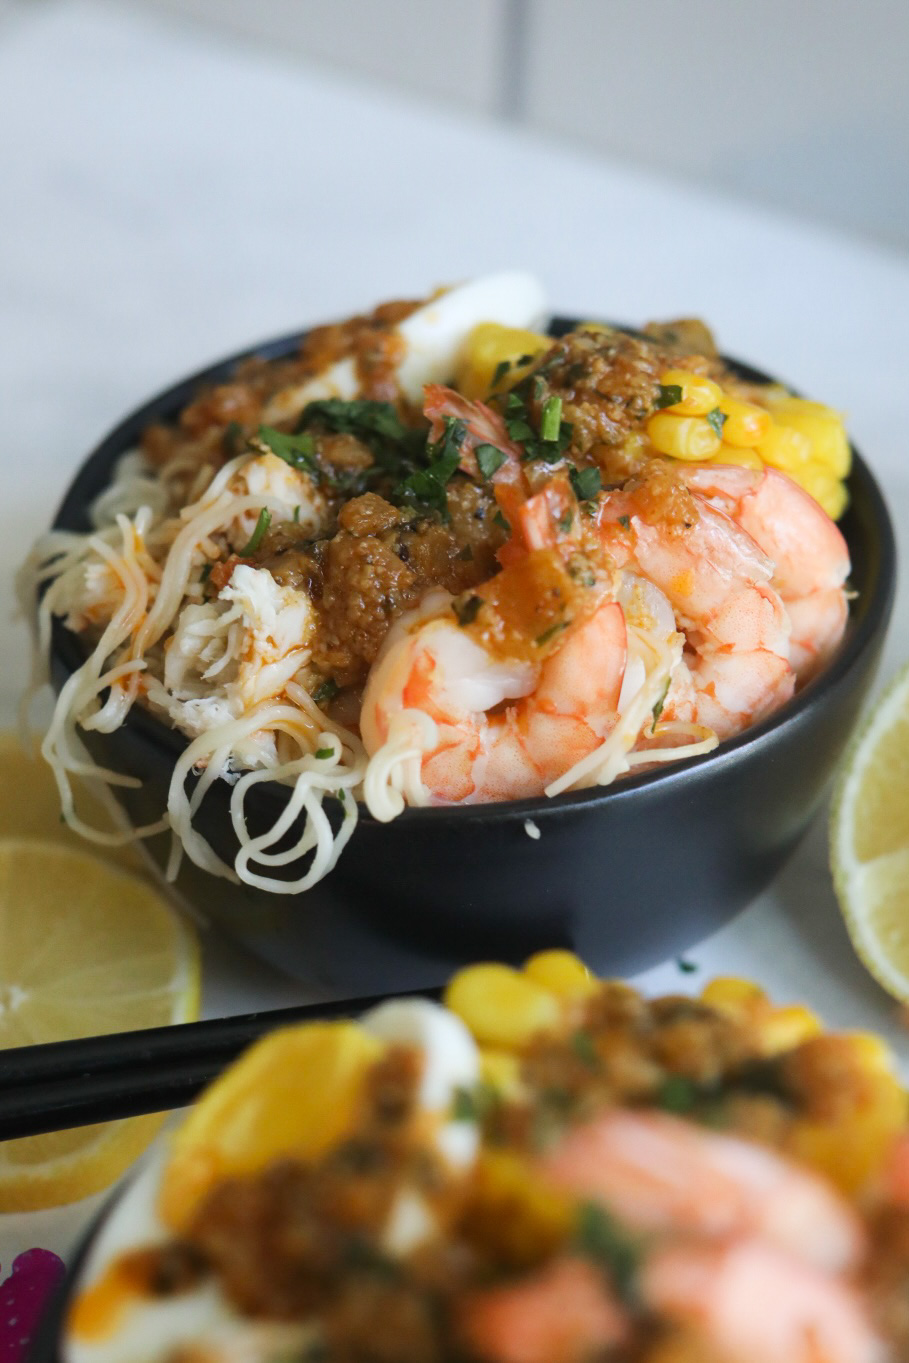 Zoomed in image of the cajun seafood ramen plated in a black bowl with sliced lemons and black chopsticks added for styling purposes.